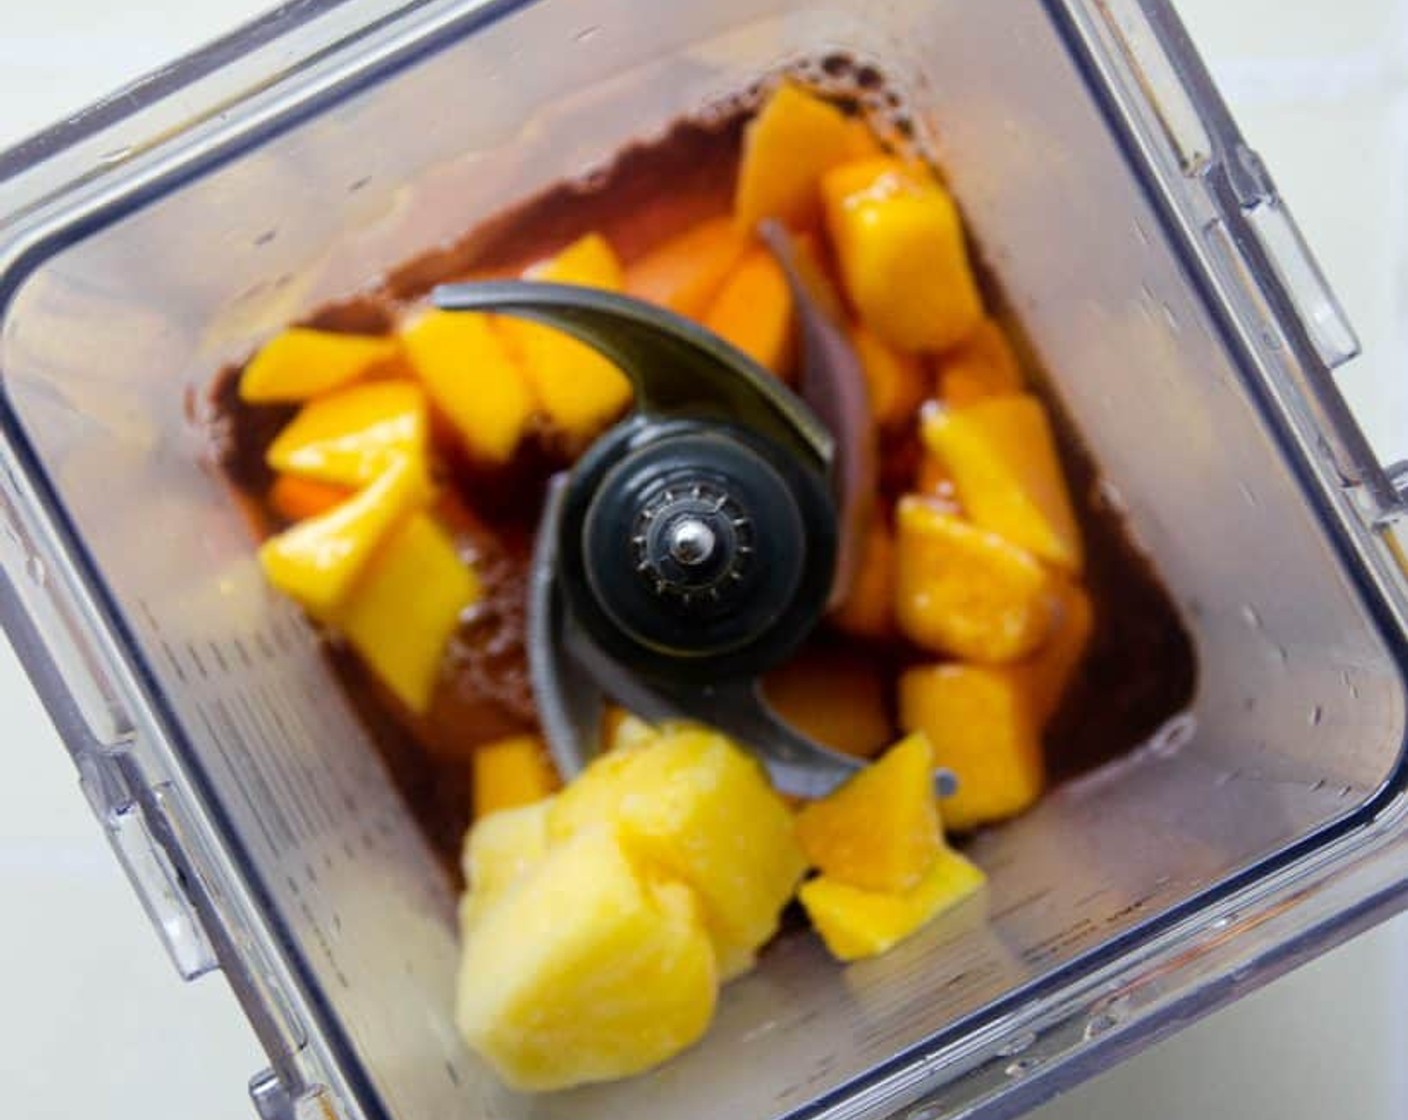 step 1 Blend the Frozen Pineapple (1 cup), Frozen Mangoes (1 cup), Agave Syrup (2 Tbsp), and Coconut Water (2 cups) in a blender until smooth. About 30-60 seconds.